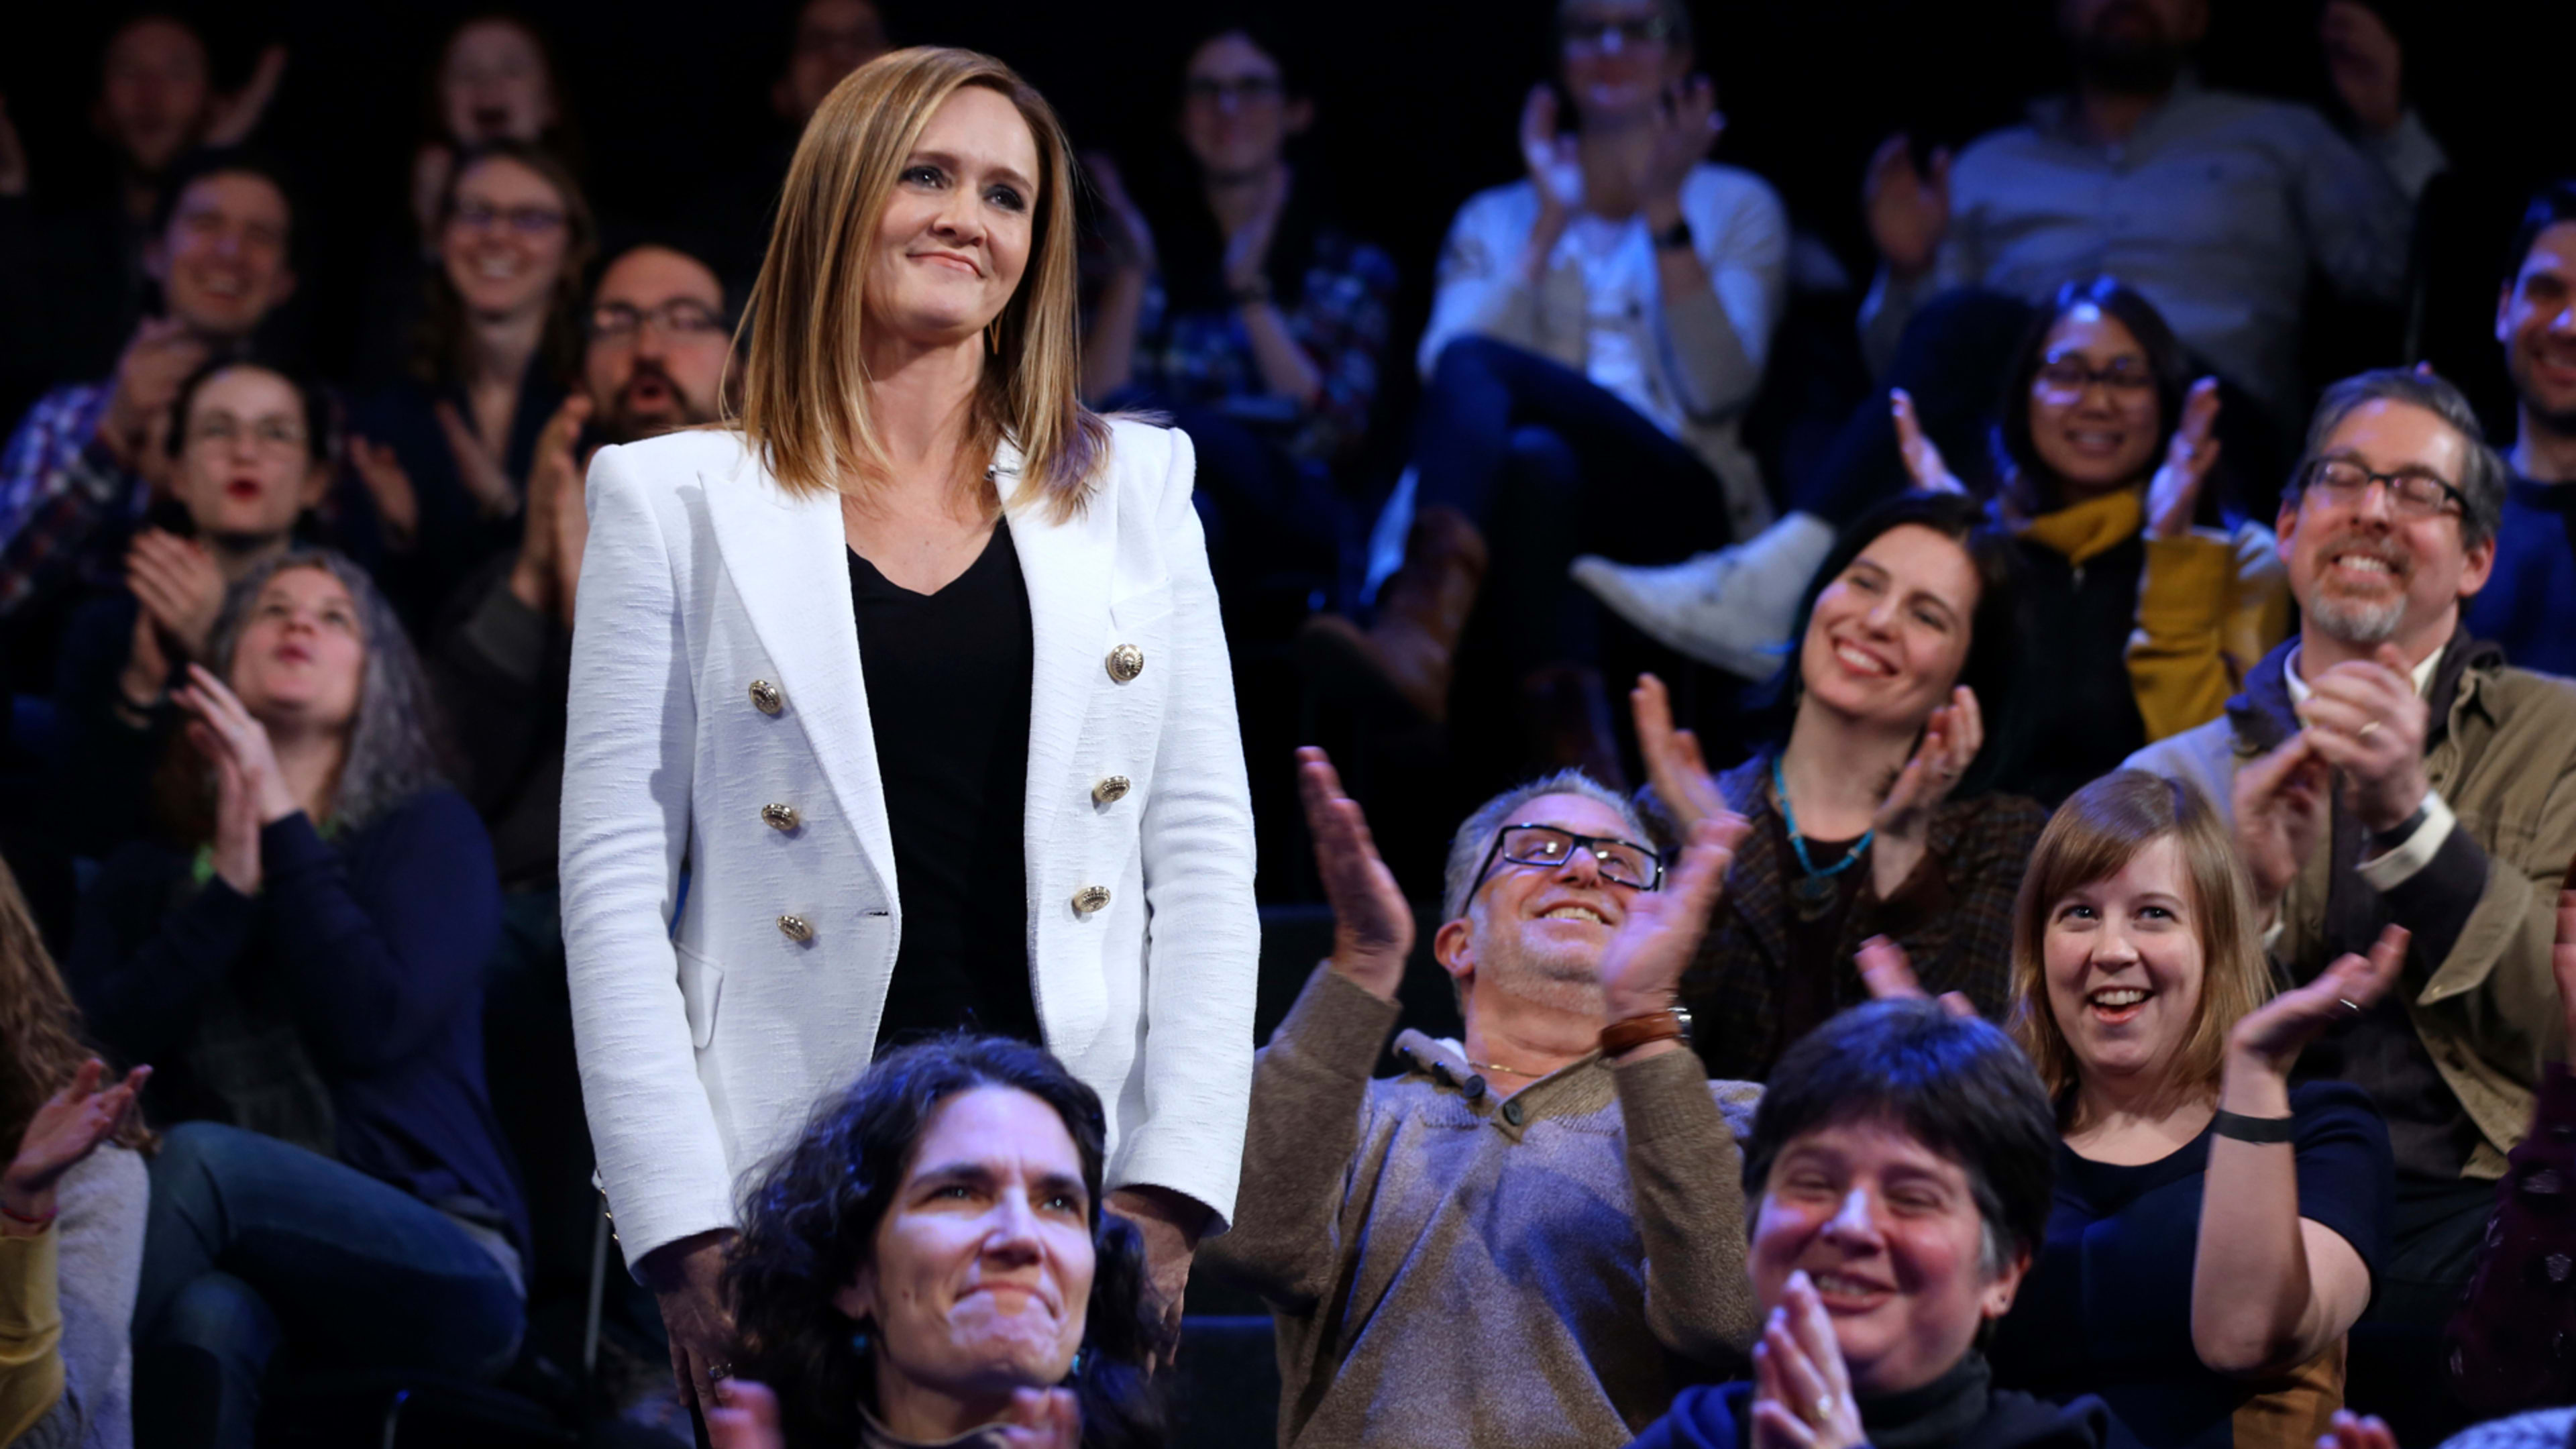 How to watch Samantha Bee’s Not the WHCD live on TBS without cable